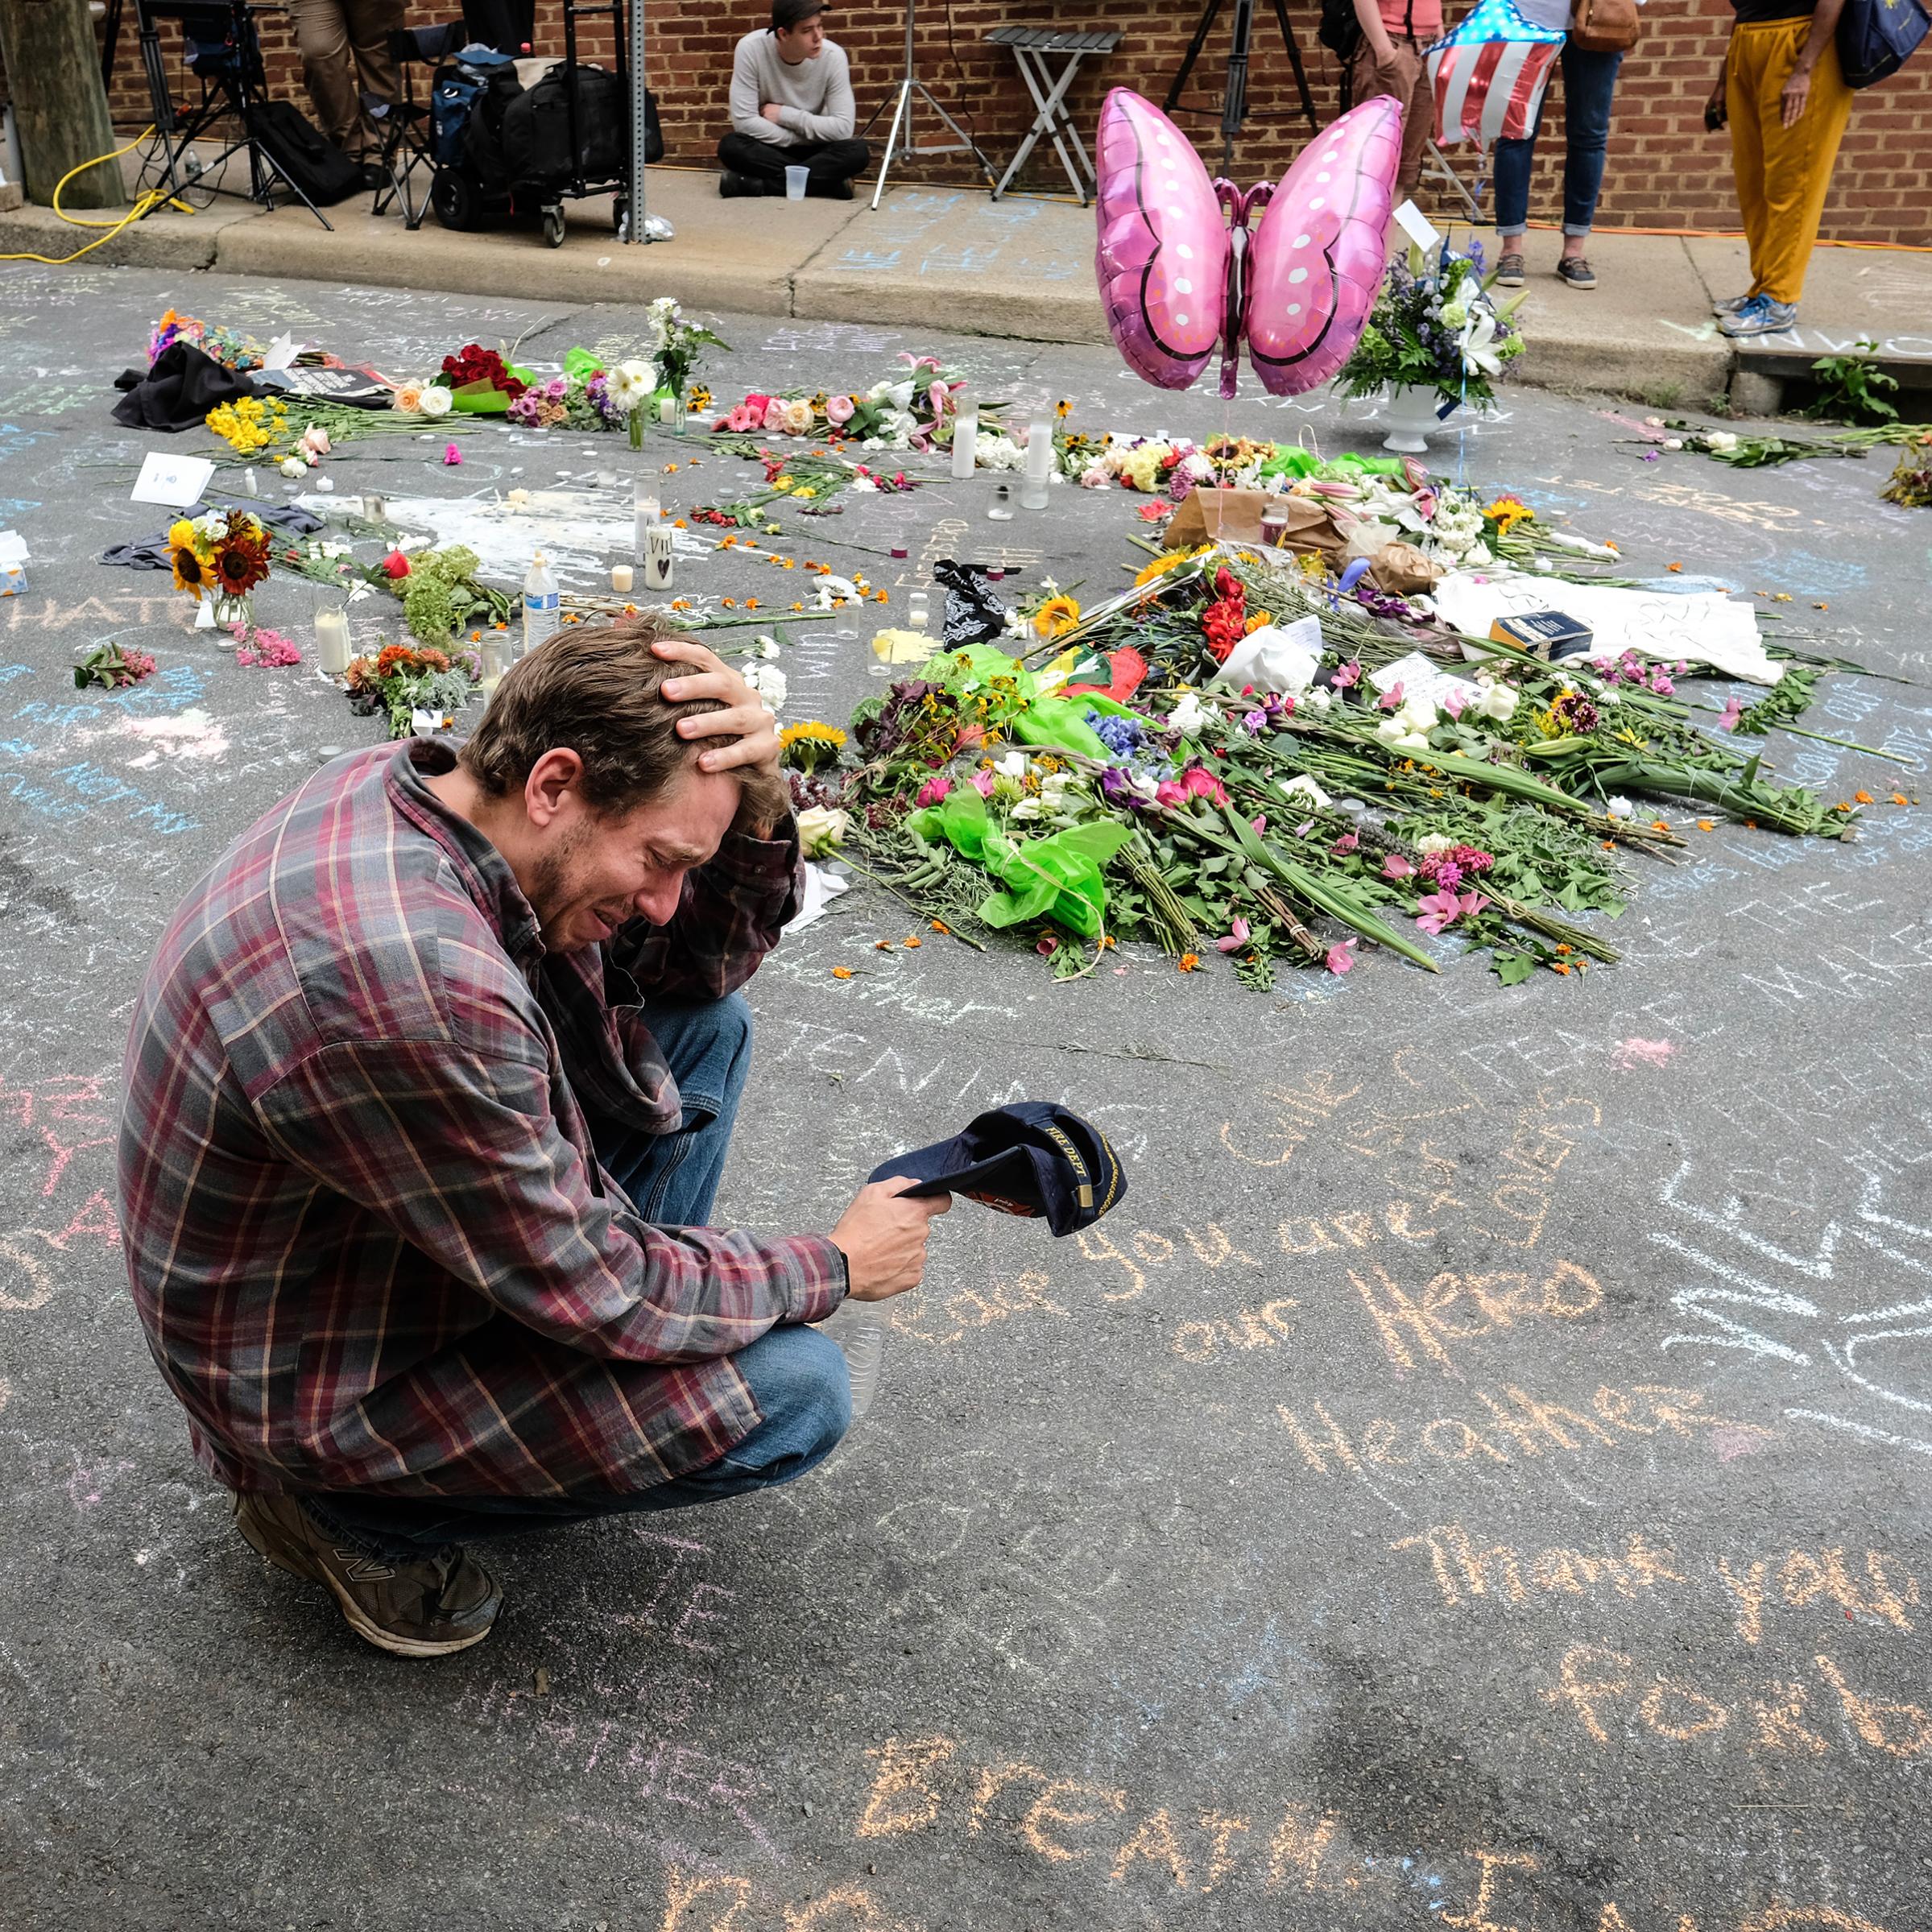 Jake Westley Anderson visits the spot where Heather Heyer died on Aug. 12.